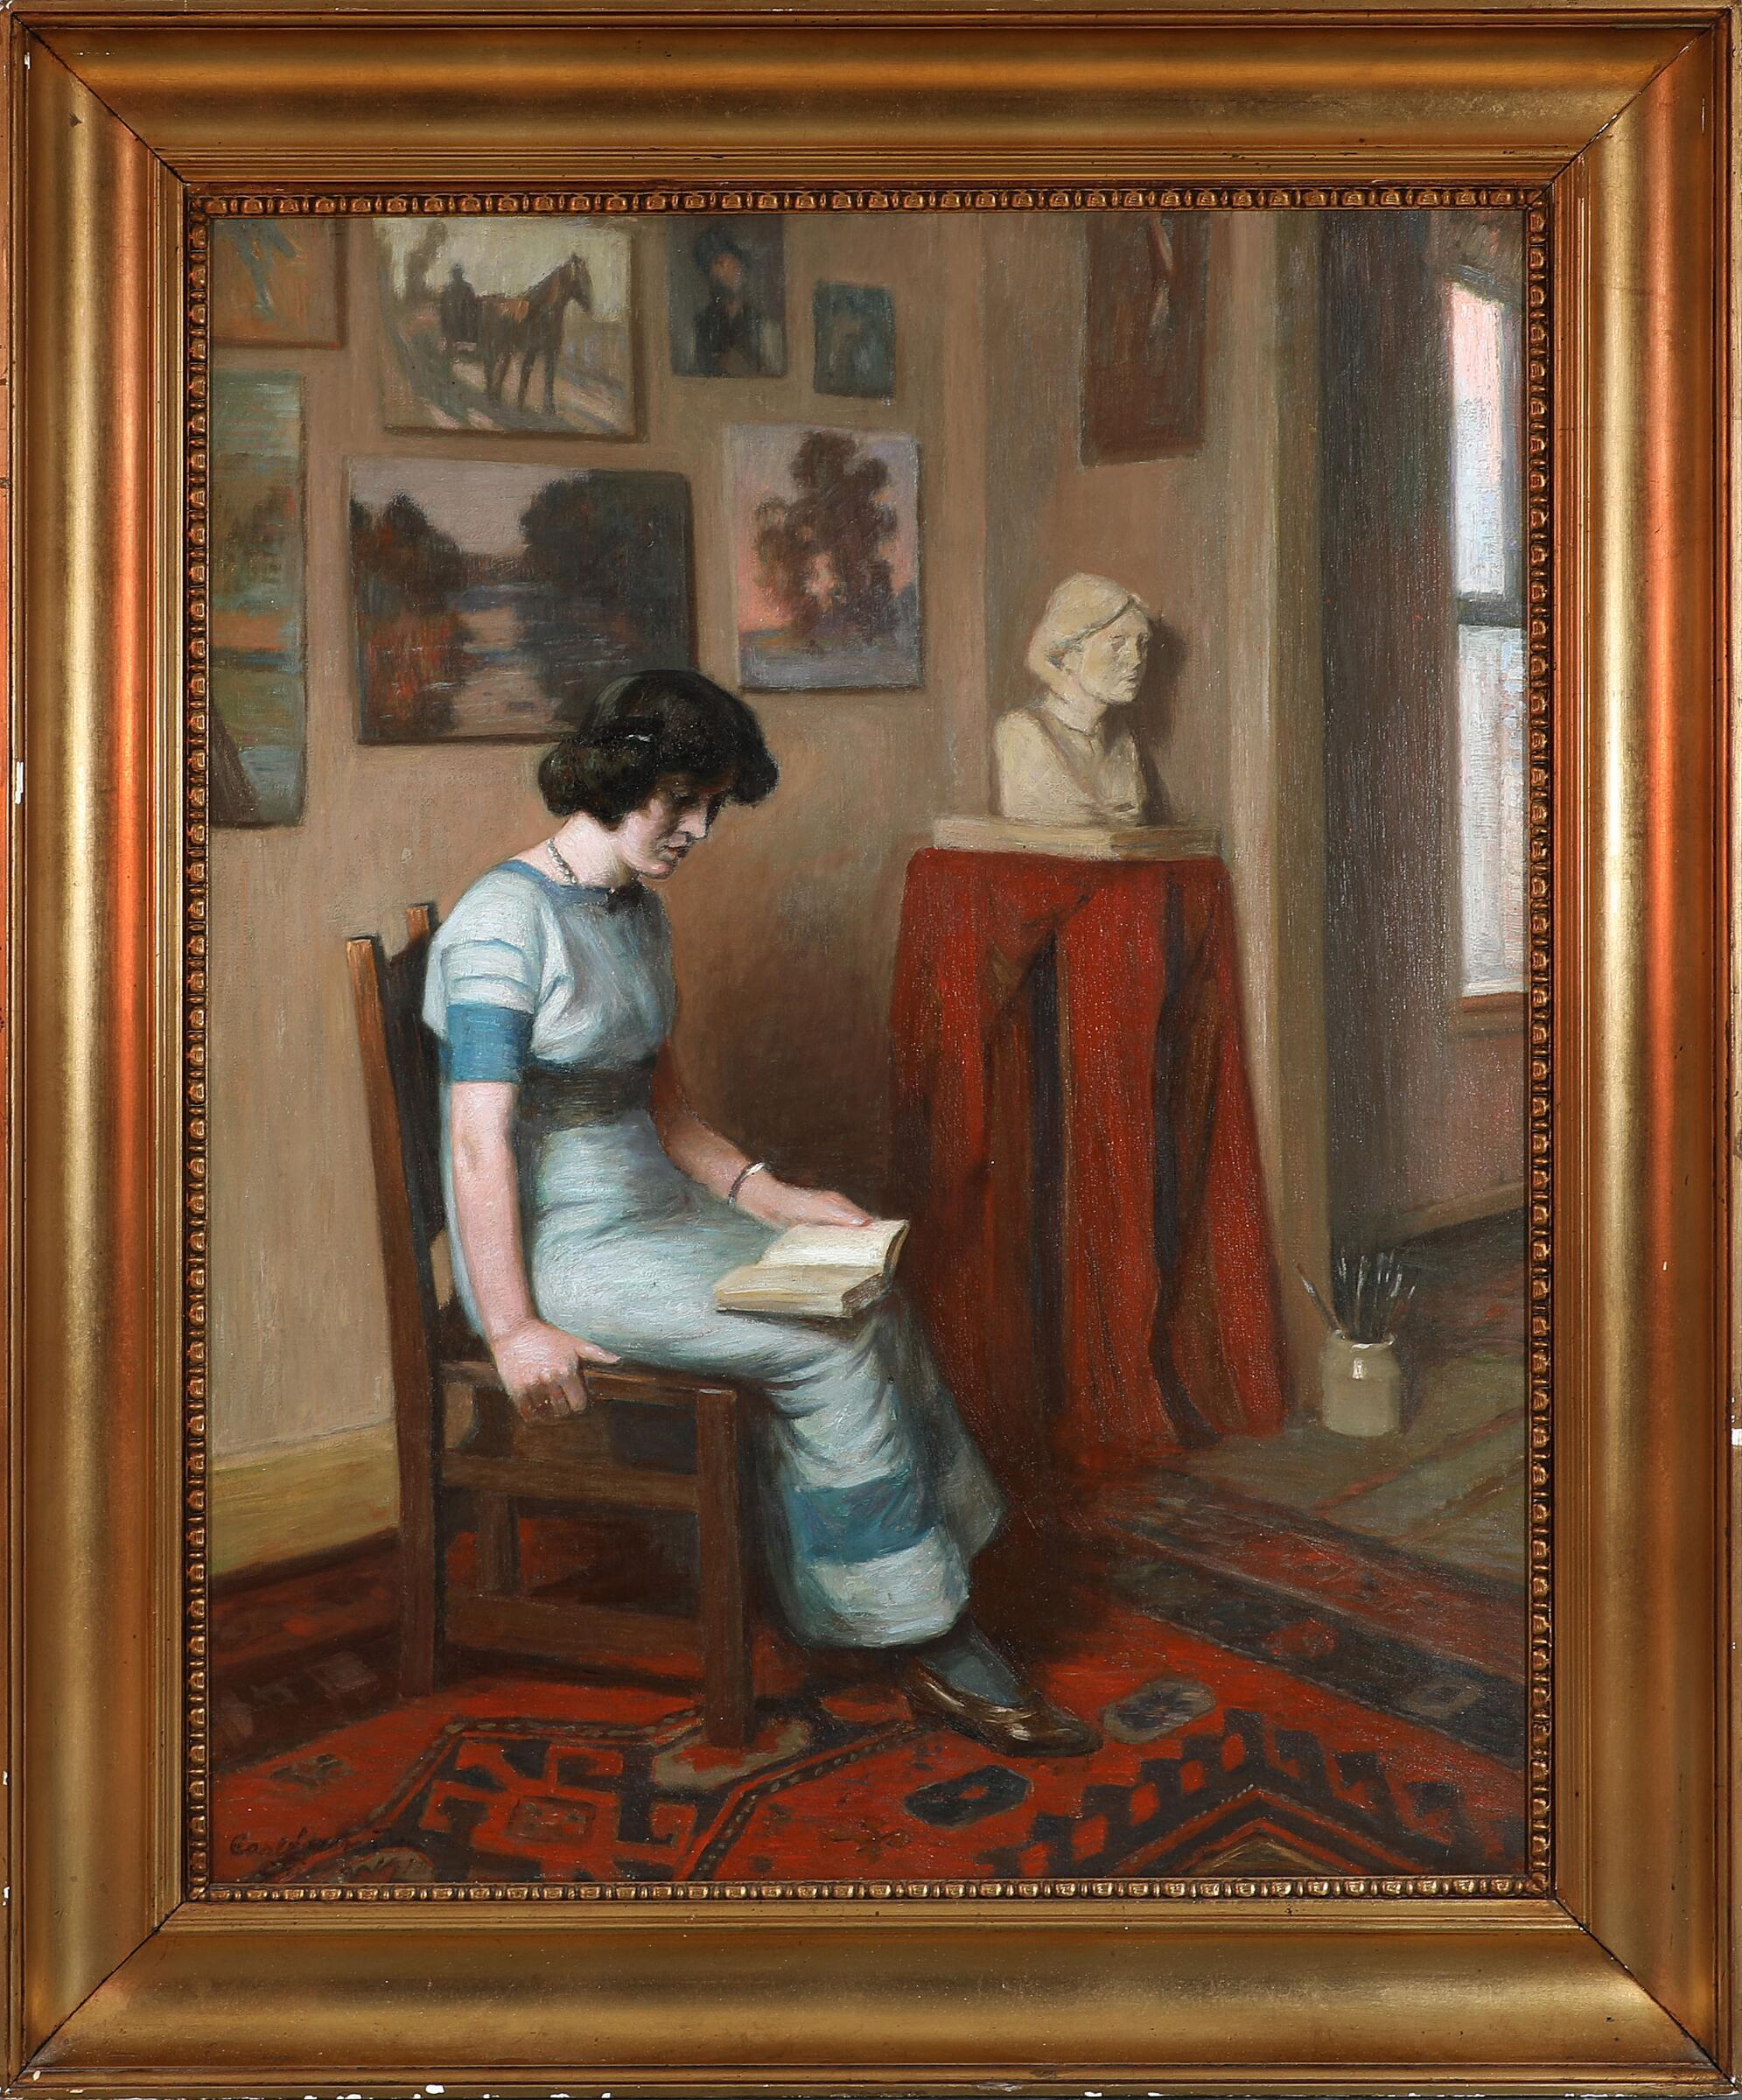 A woman reading in an interior. Indistinct signature Ca[....]. Danish painter beginning of the 20th century. Oil on canvas. Original frame.